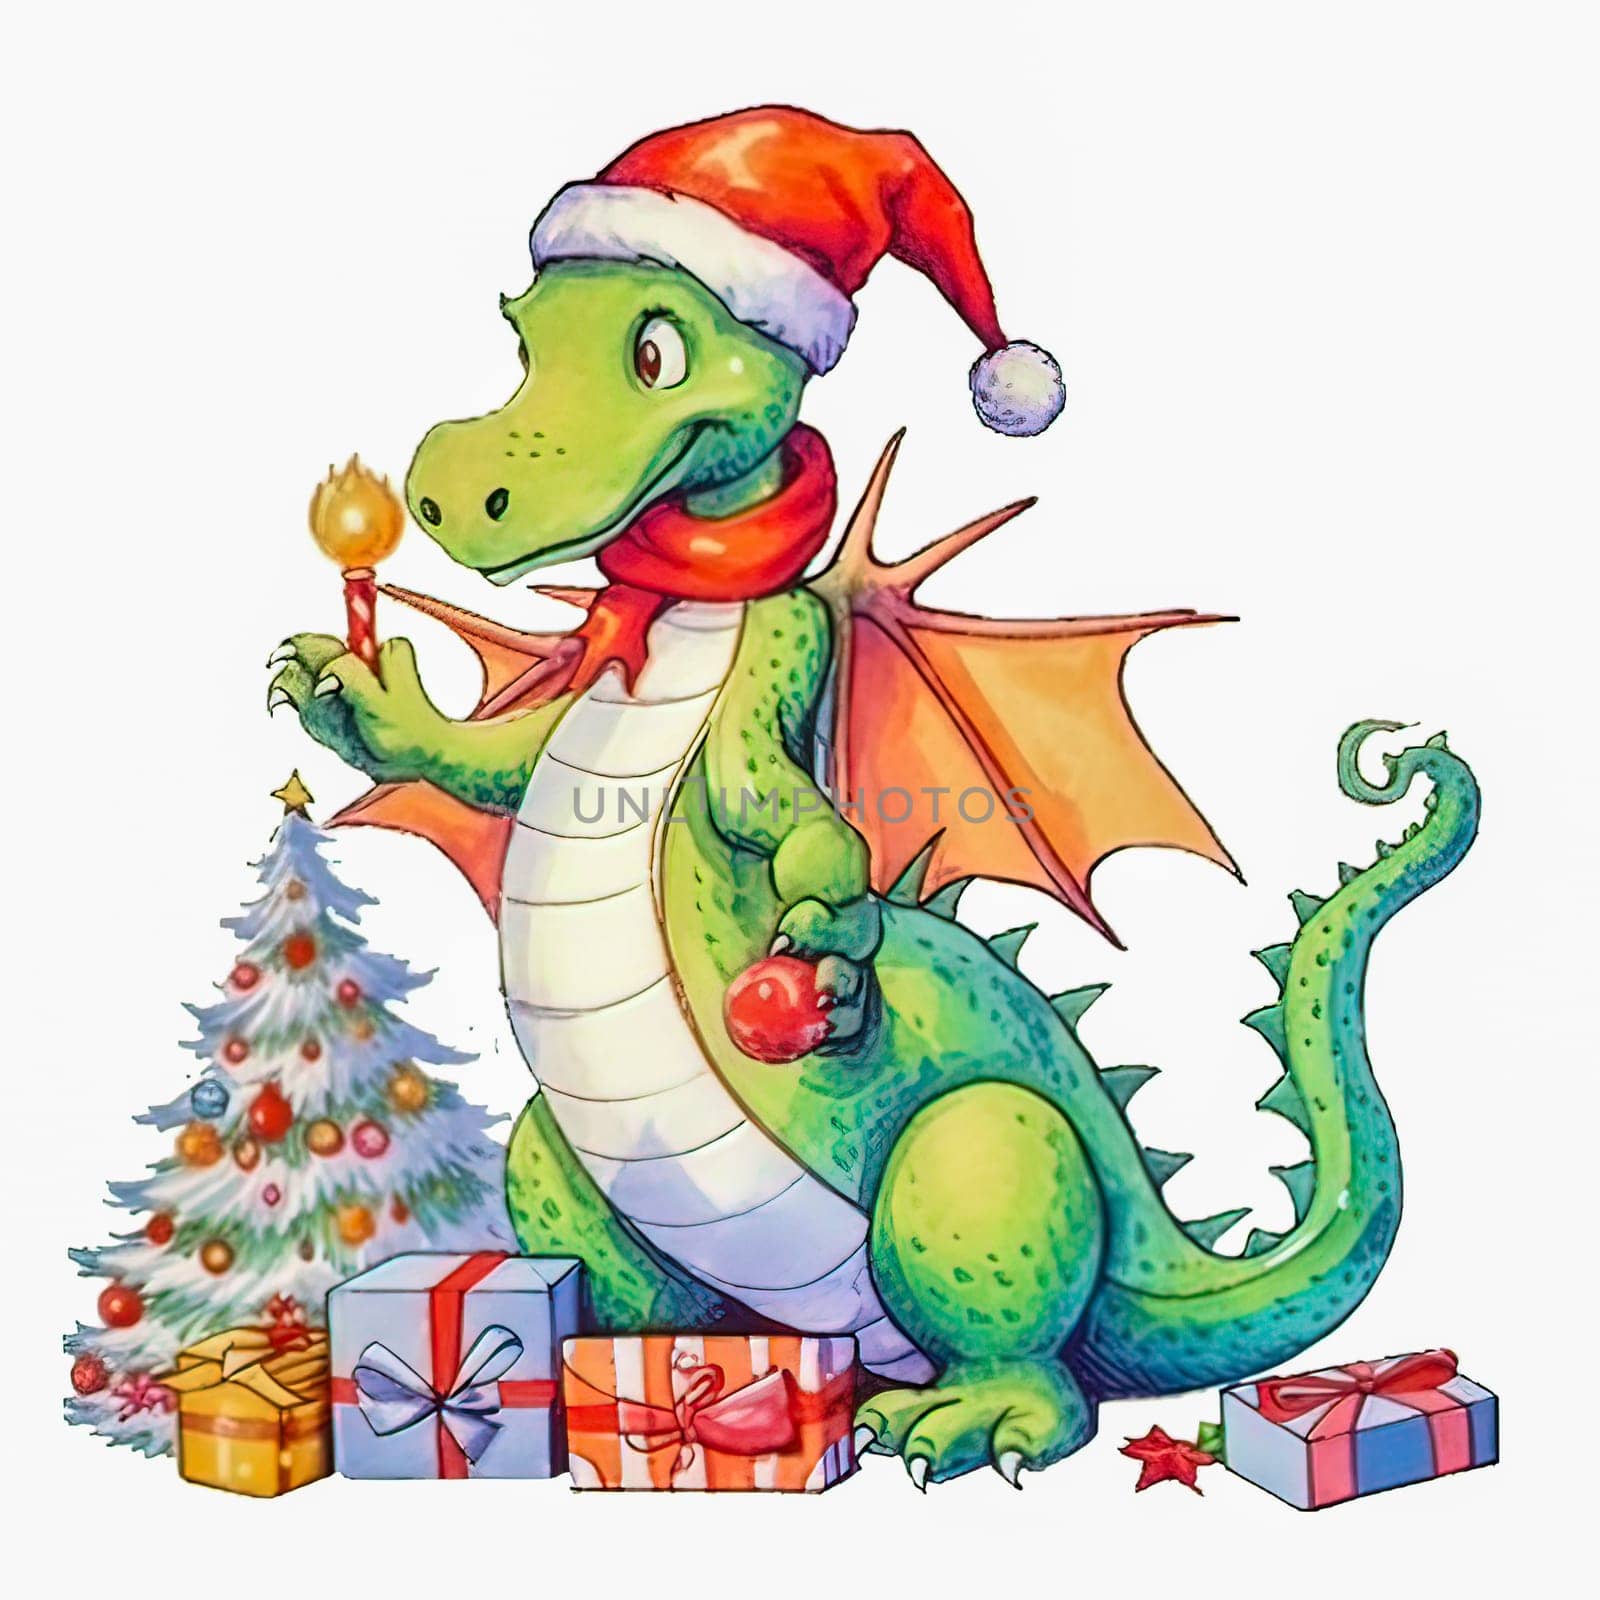 Illustration of a small green dragon in a red cap with a Christmas tree and presents on a white background. Year of the dragon. New Year illustration. by Yurich32